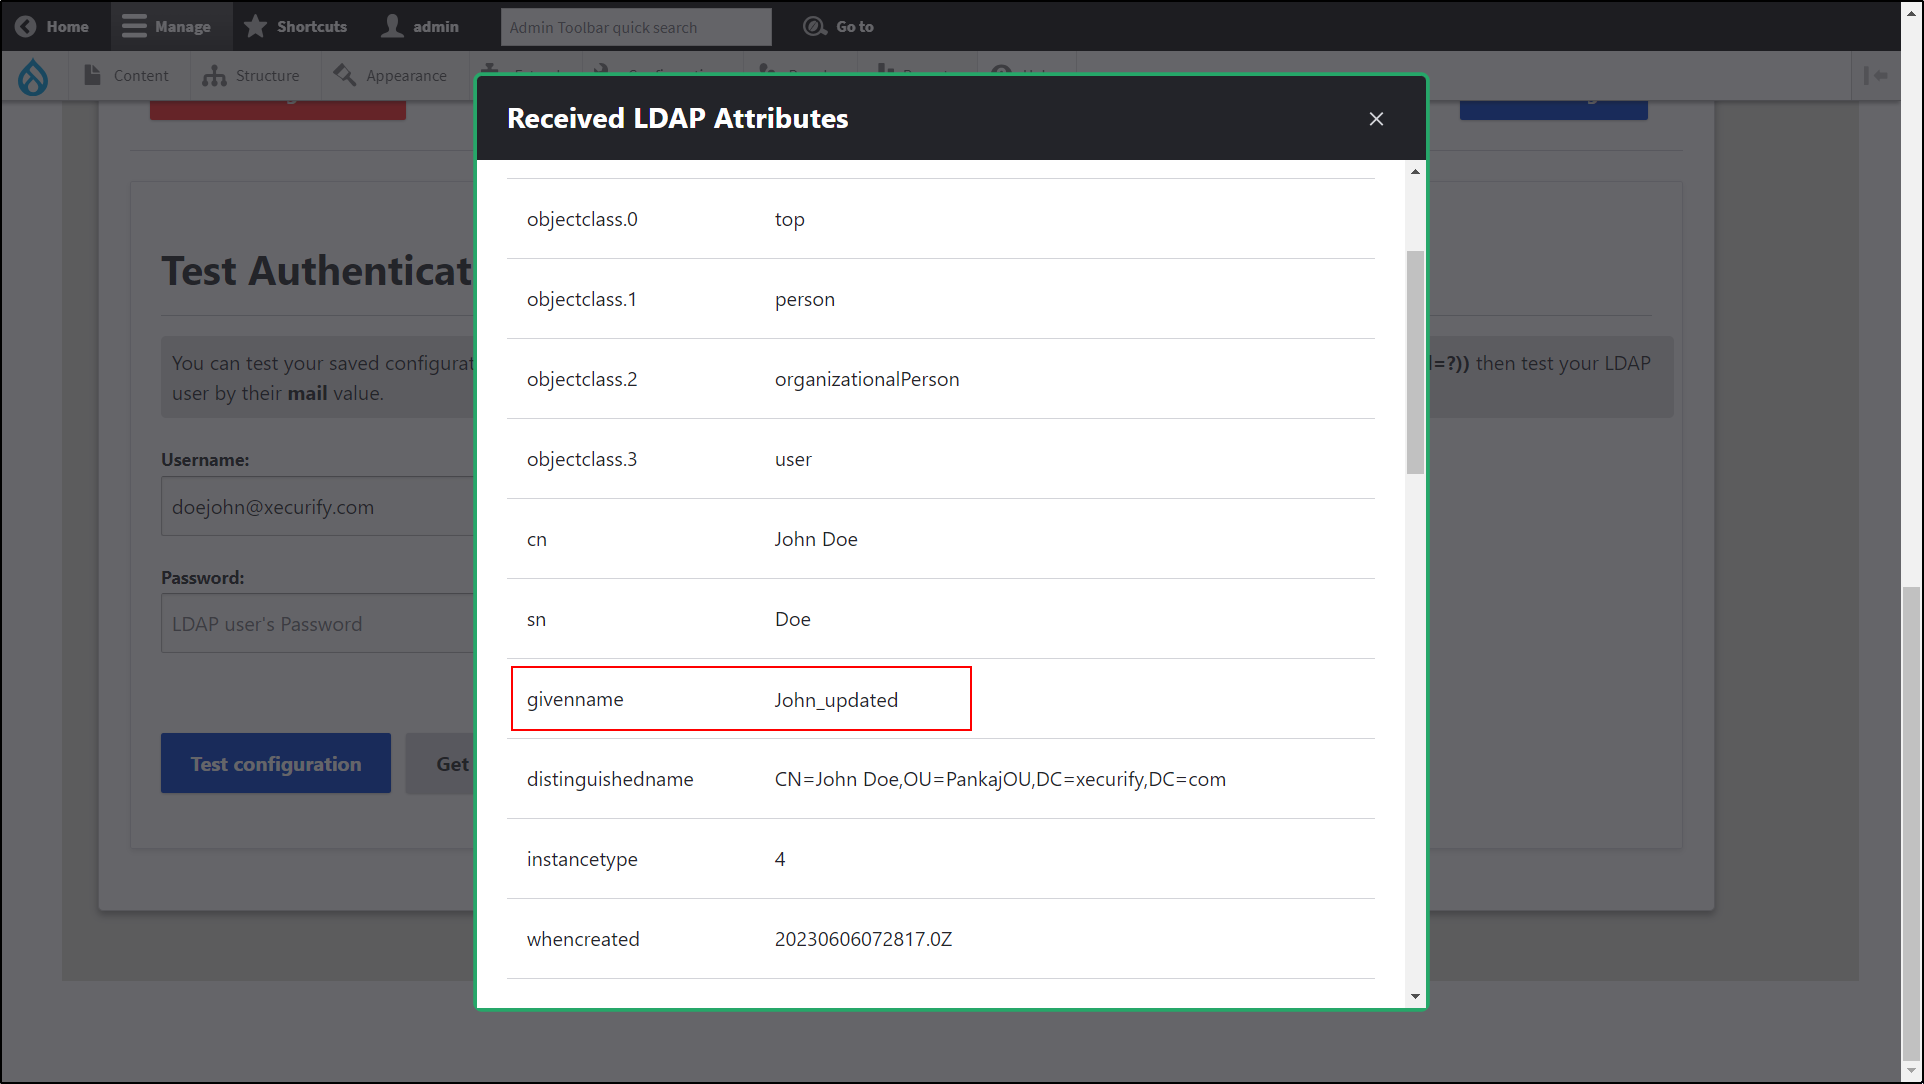 Drupal LDAP/Active Directory Integration - The below user information userprincipalname and givenmane has been updated in the given fields in the Received LDAP Attribute popup.